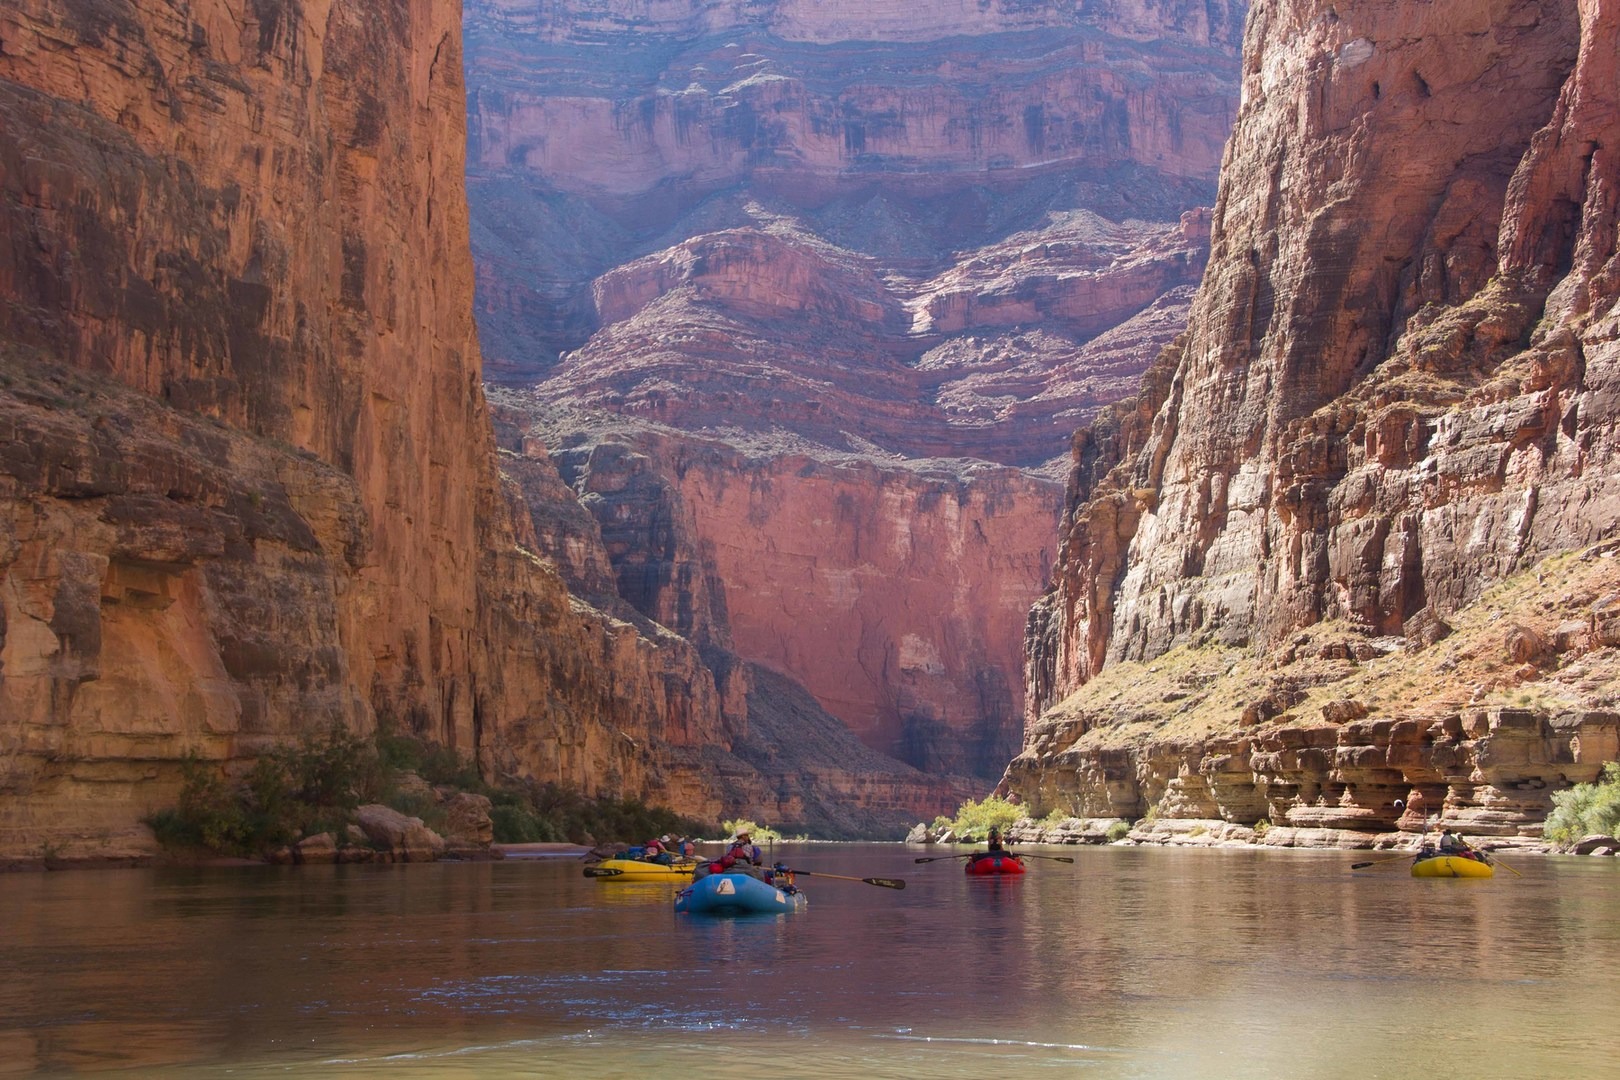 The Grand Canyon of the Colorado River | Outdoor Project